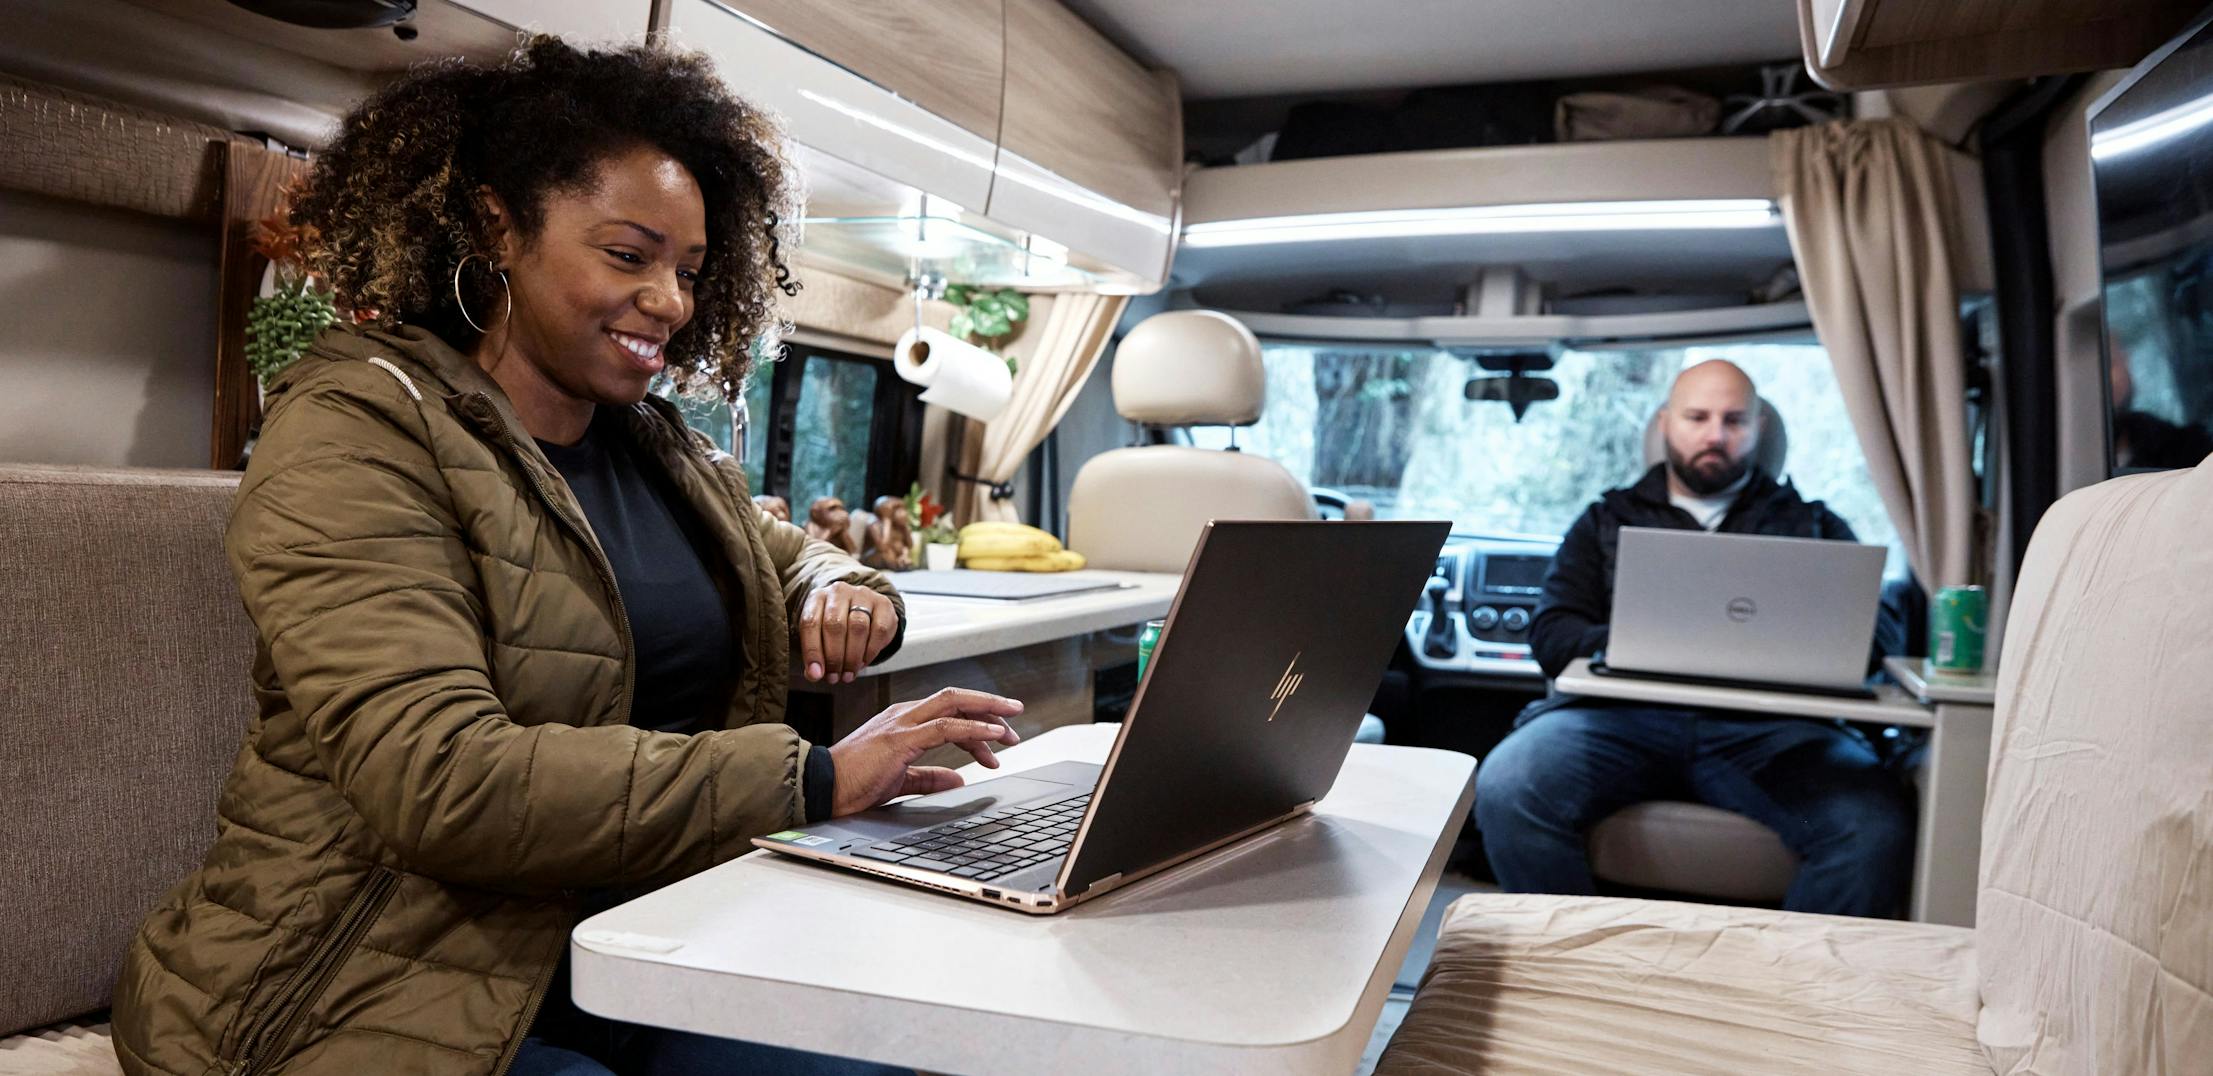 Gabe and Rocio Rivero working inside their RV on their computers